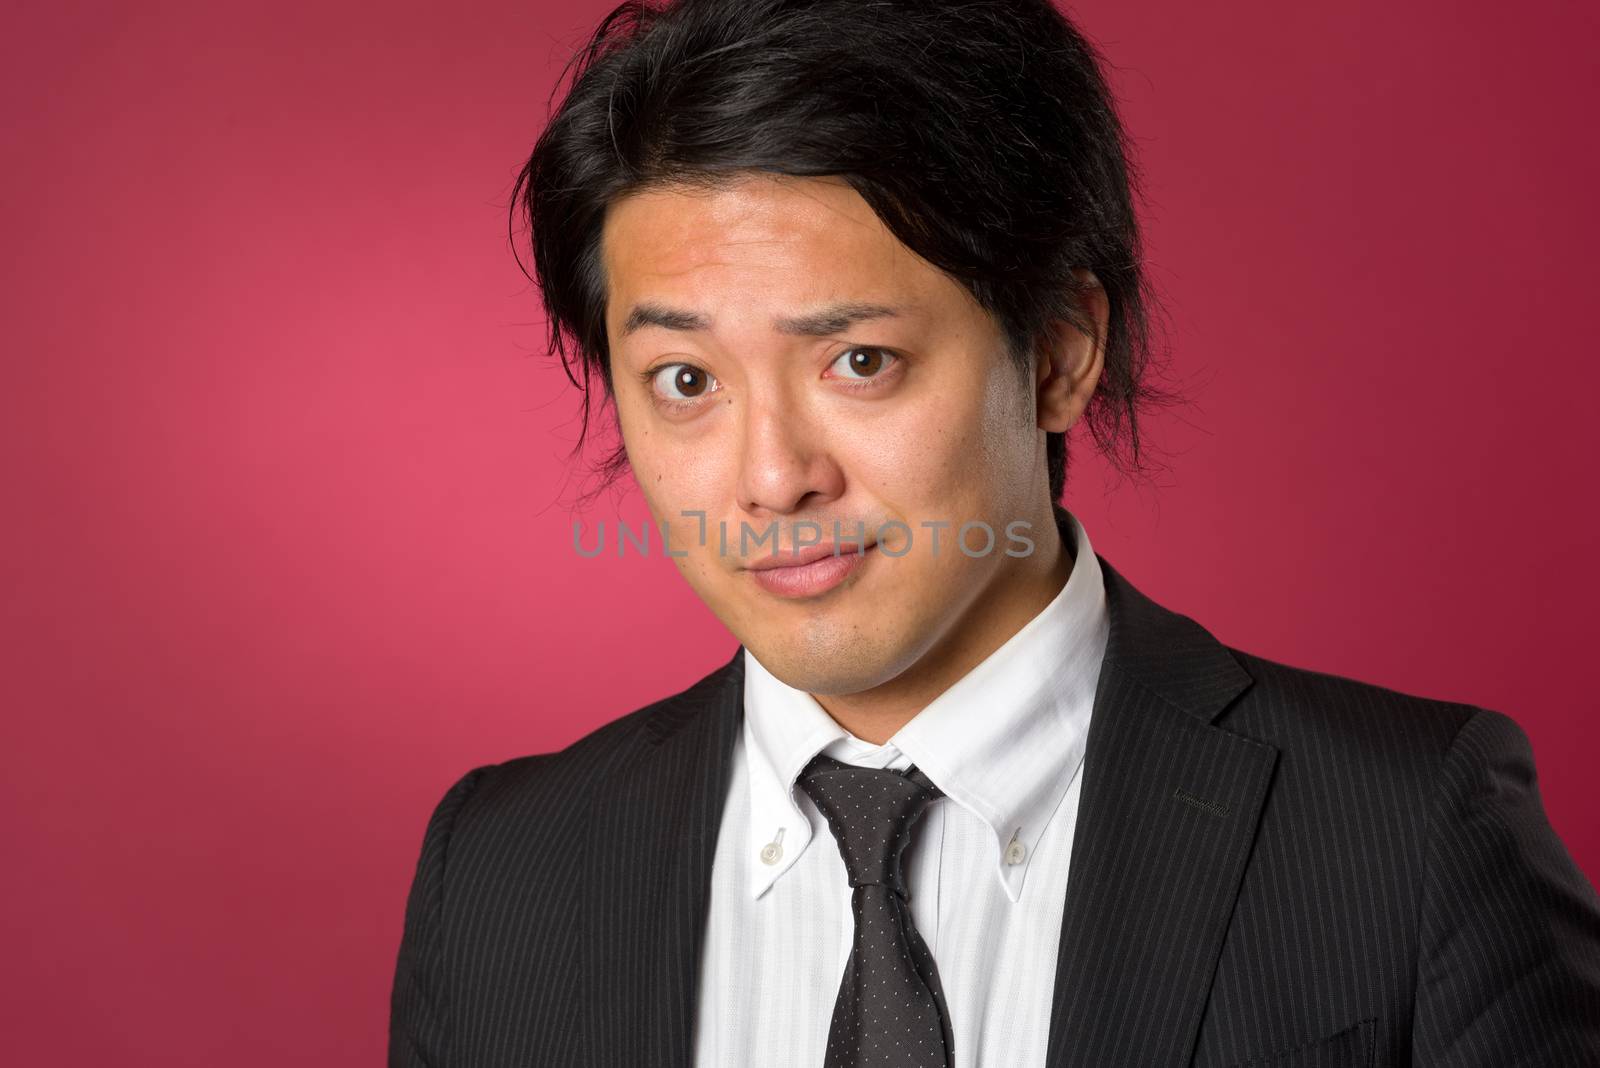 A headshot style portrait of a young Japanese man wearing a business suit on a red background with a slight smile.